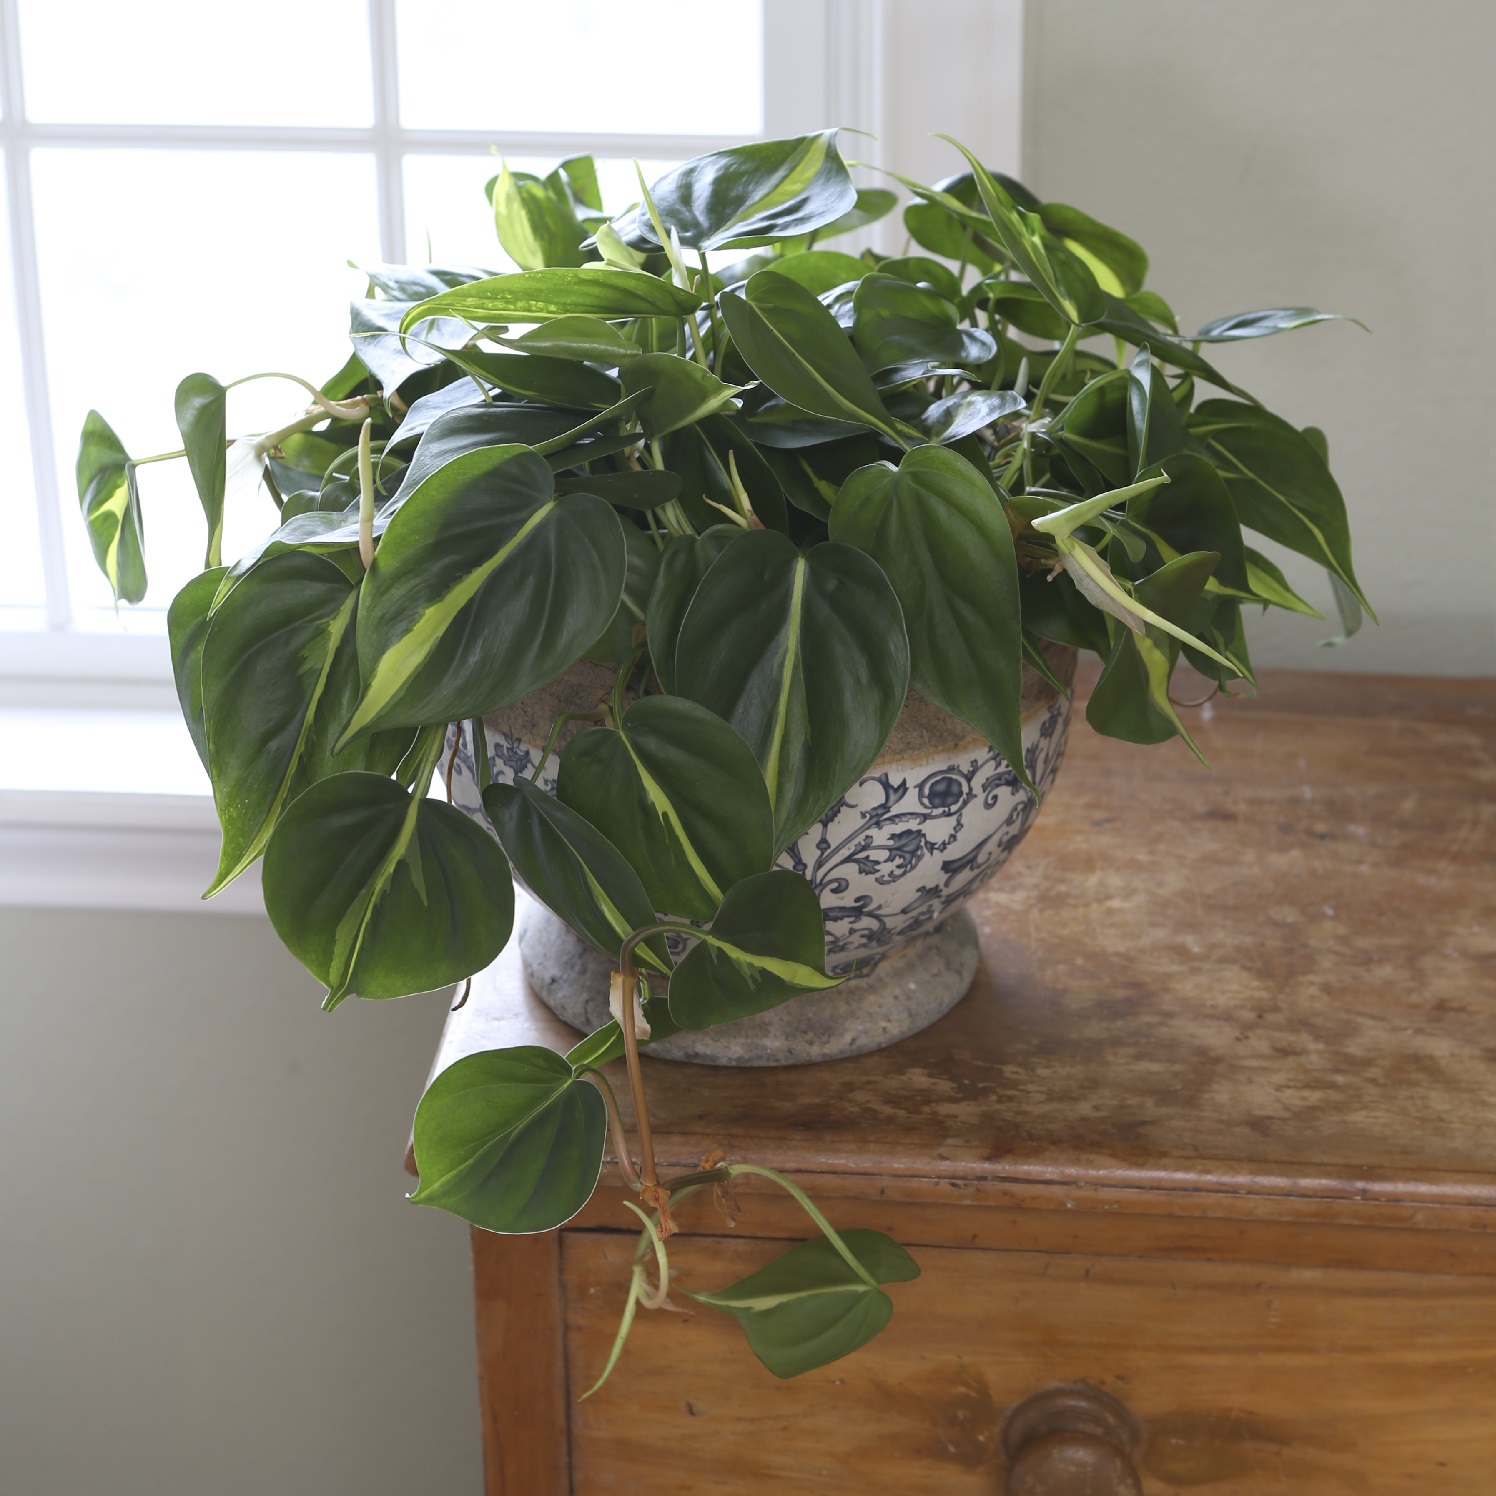 Classic philodendrons are easy to care for and grow just about anywhere.